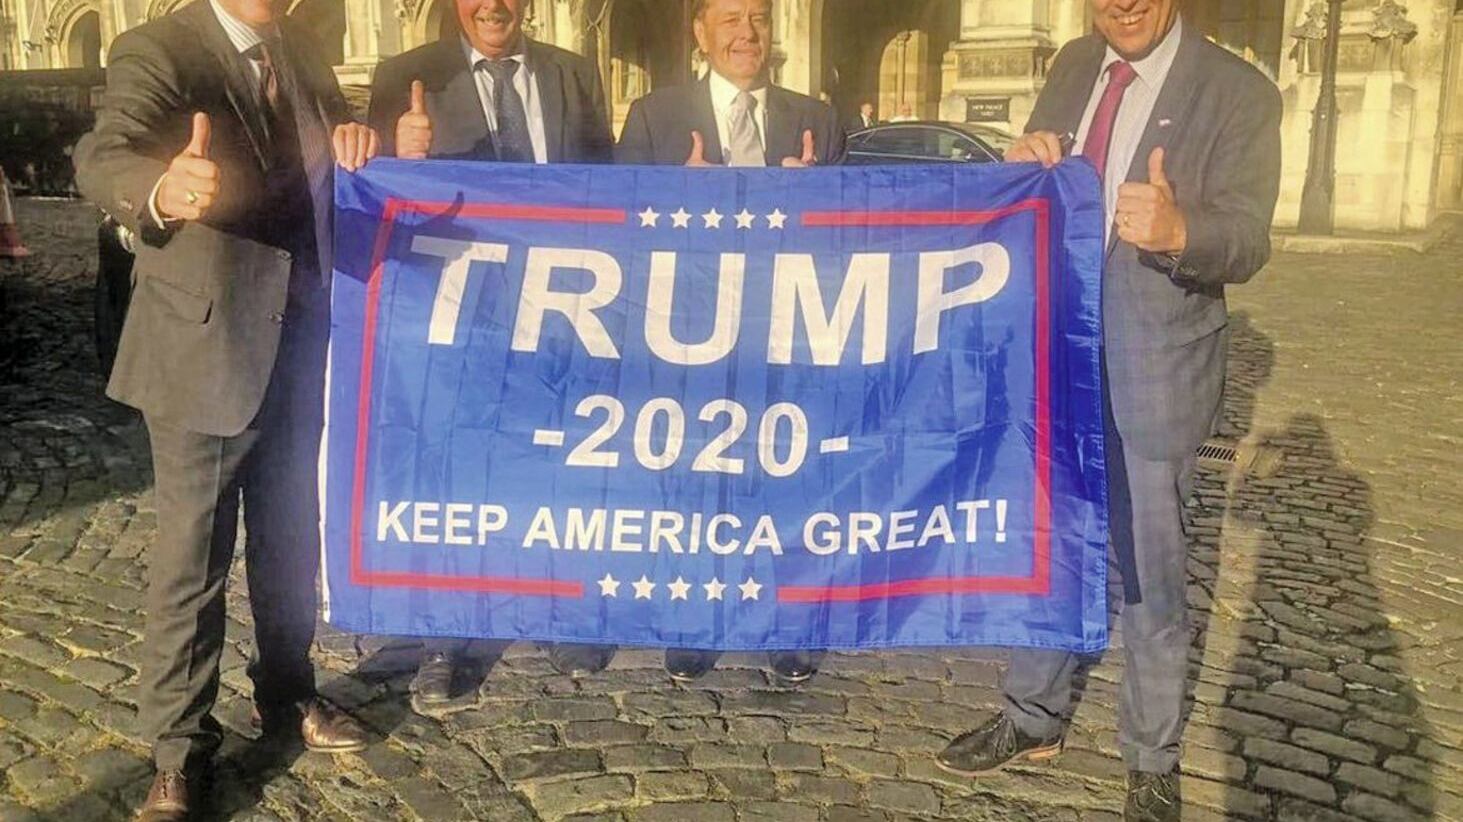 DUP MPs Sammy Wilson, Ian Paisley and Paul Girvan hold a flag supporting Donald Trump in the 2020 US presidential election 